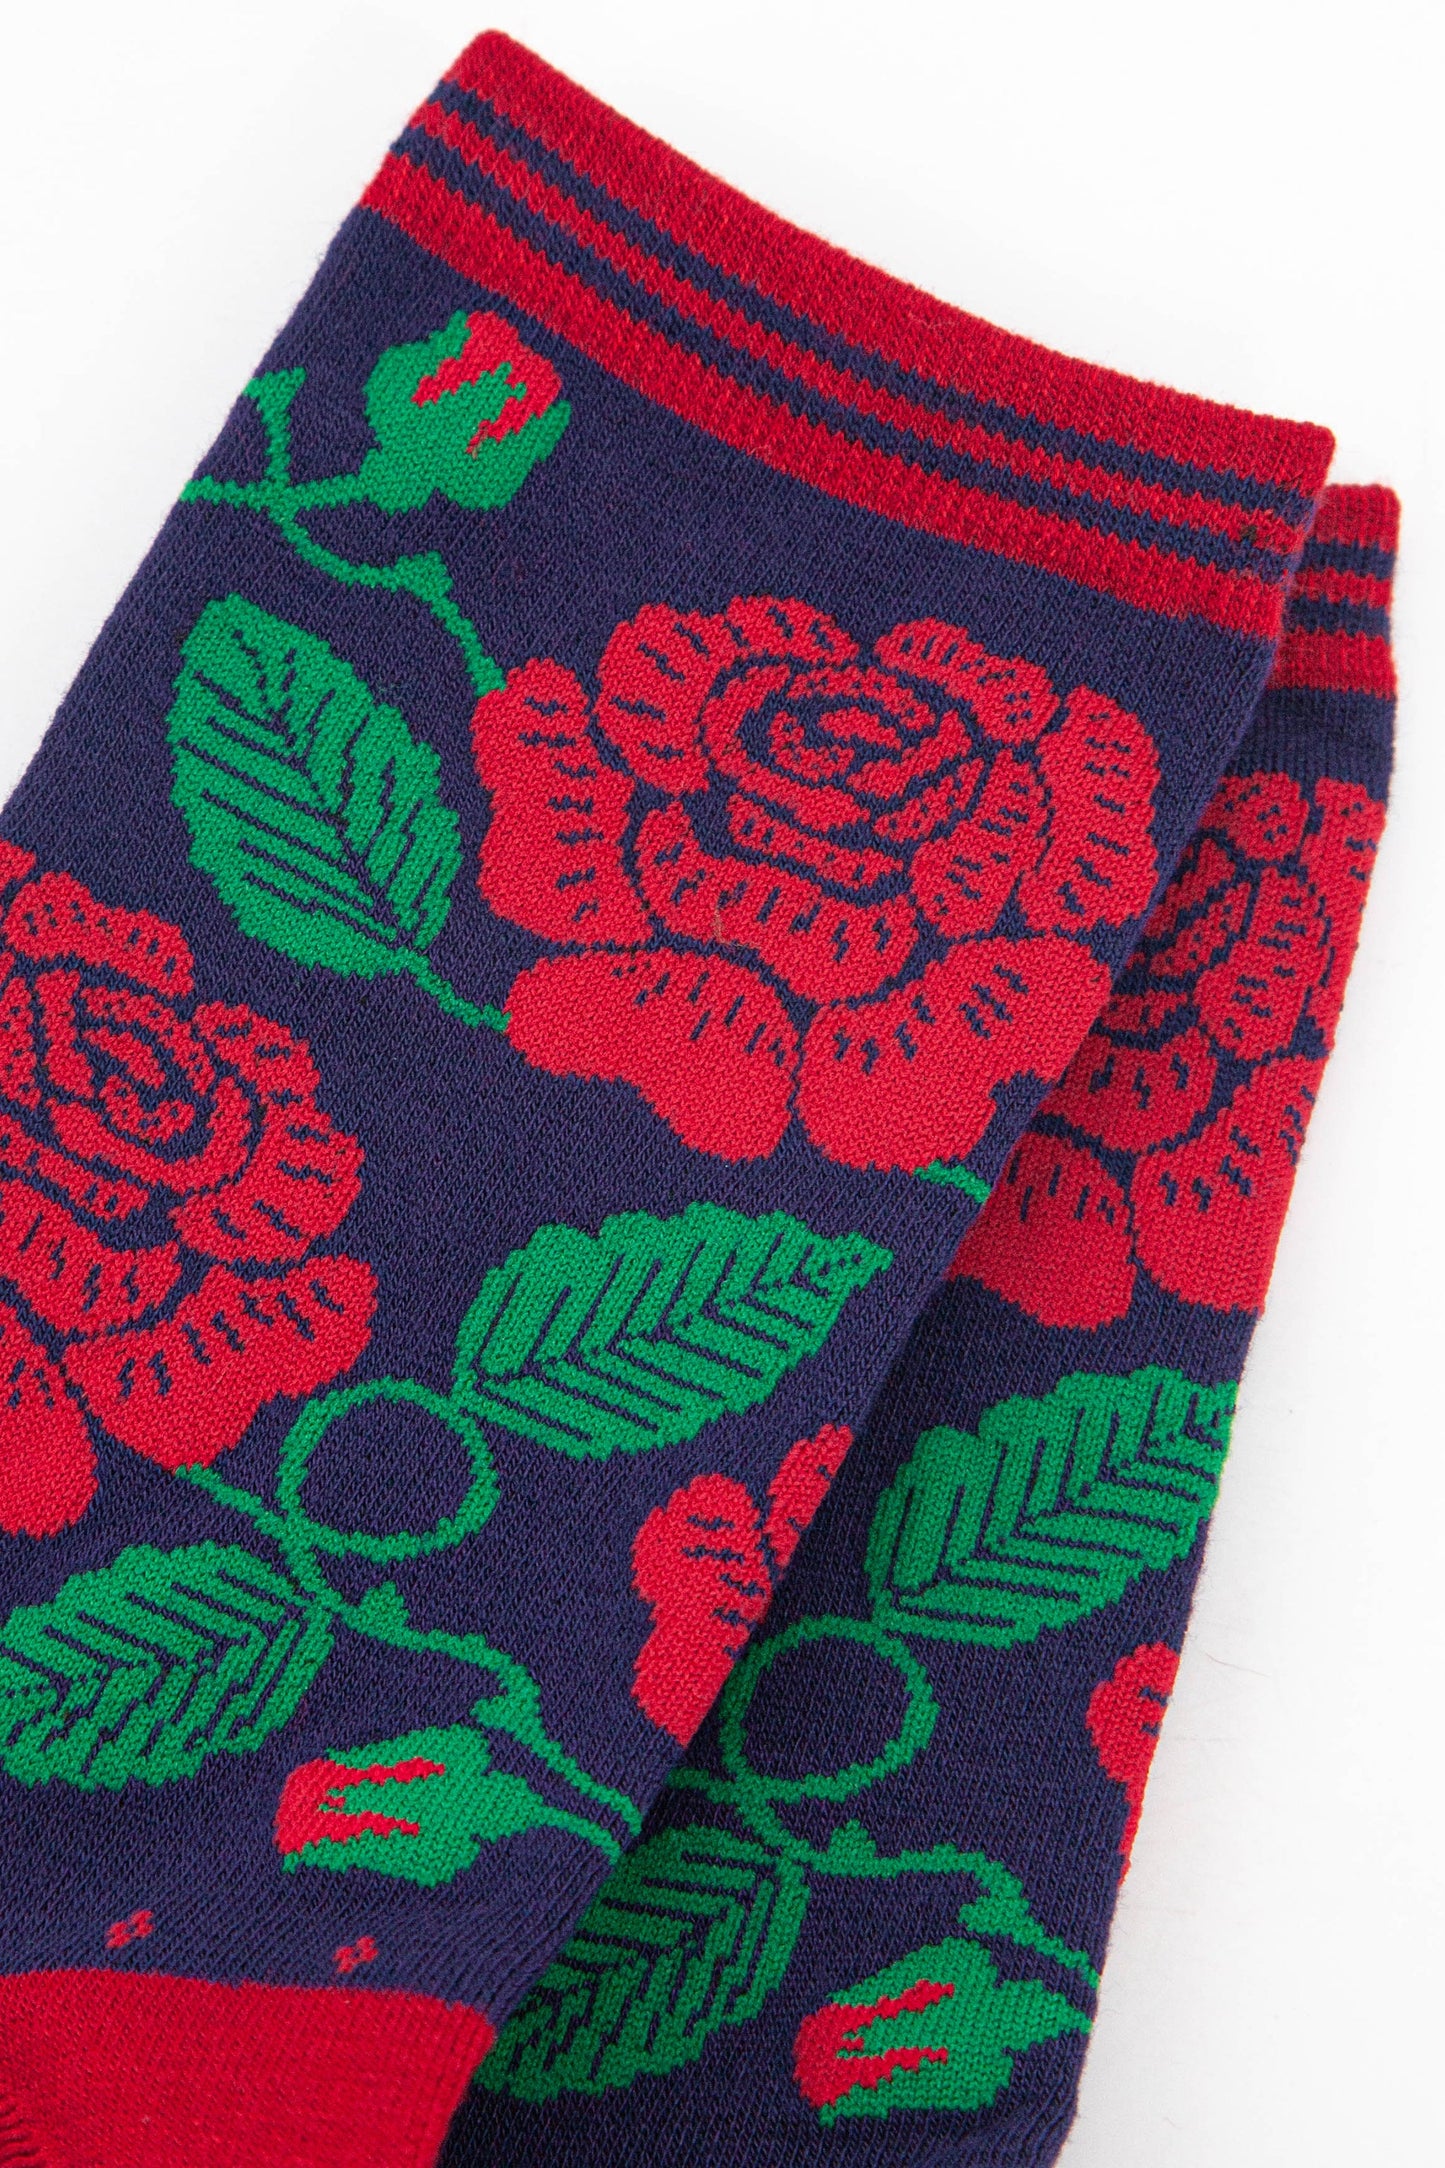 close up of the red rose pattern on the ankle of the socks